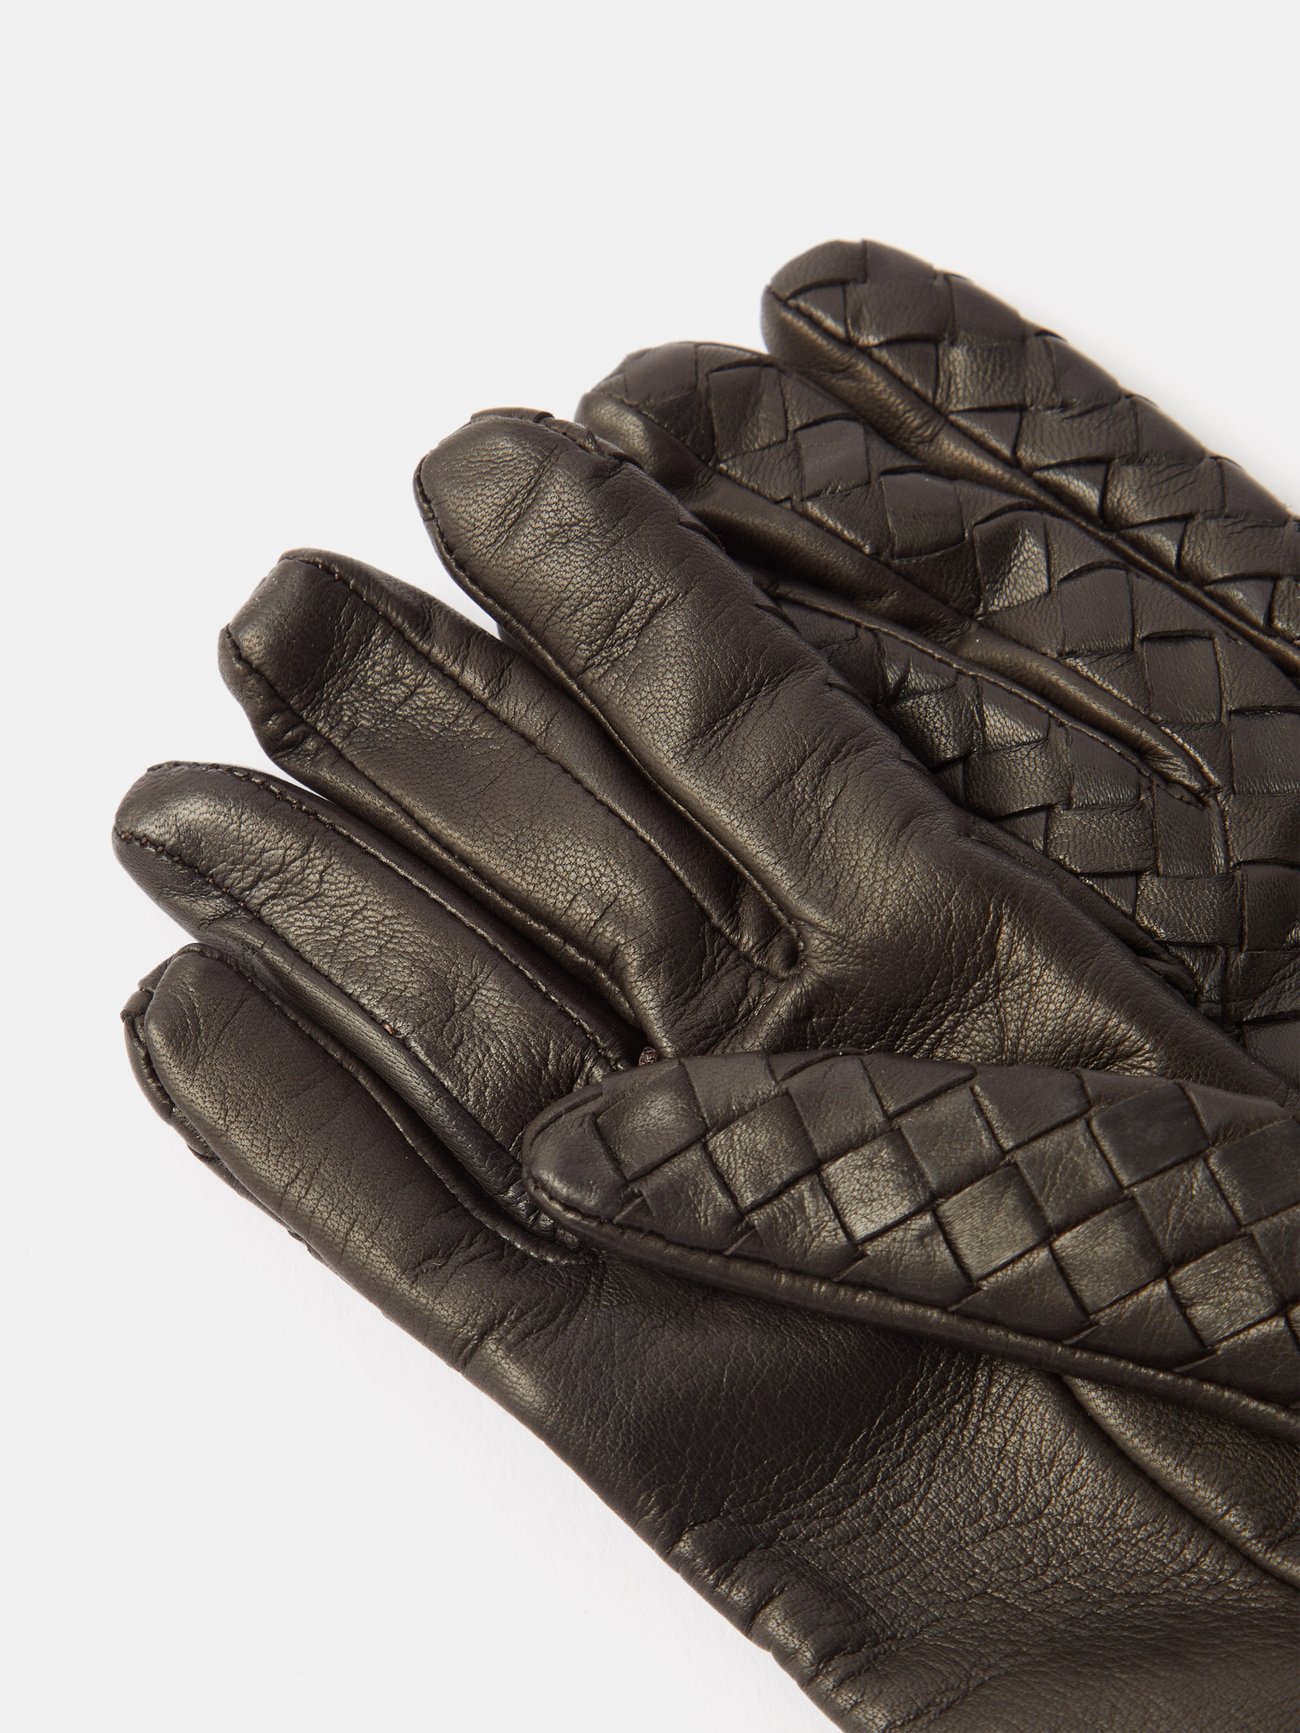 Intrecciato-leather long gloves